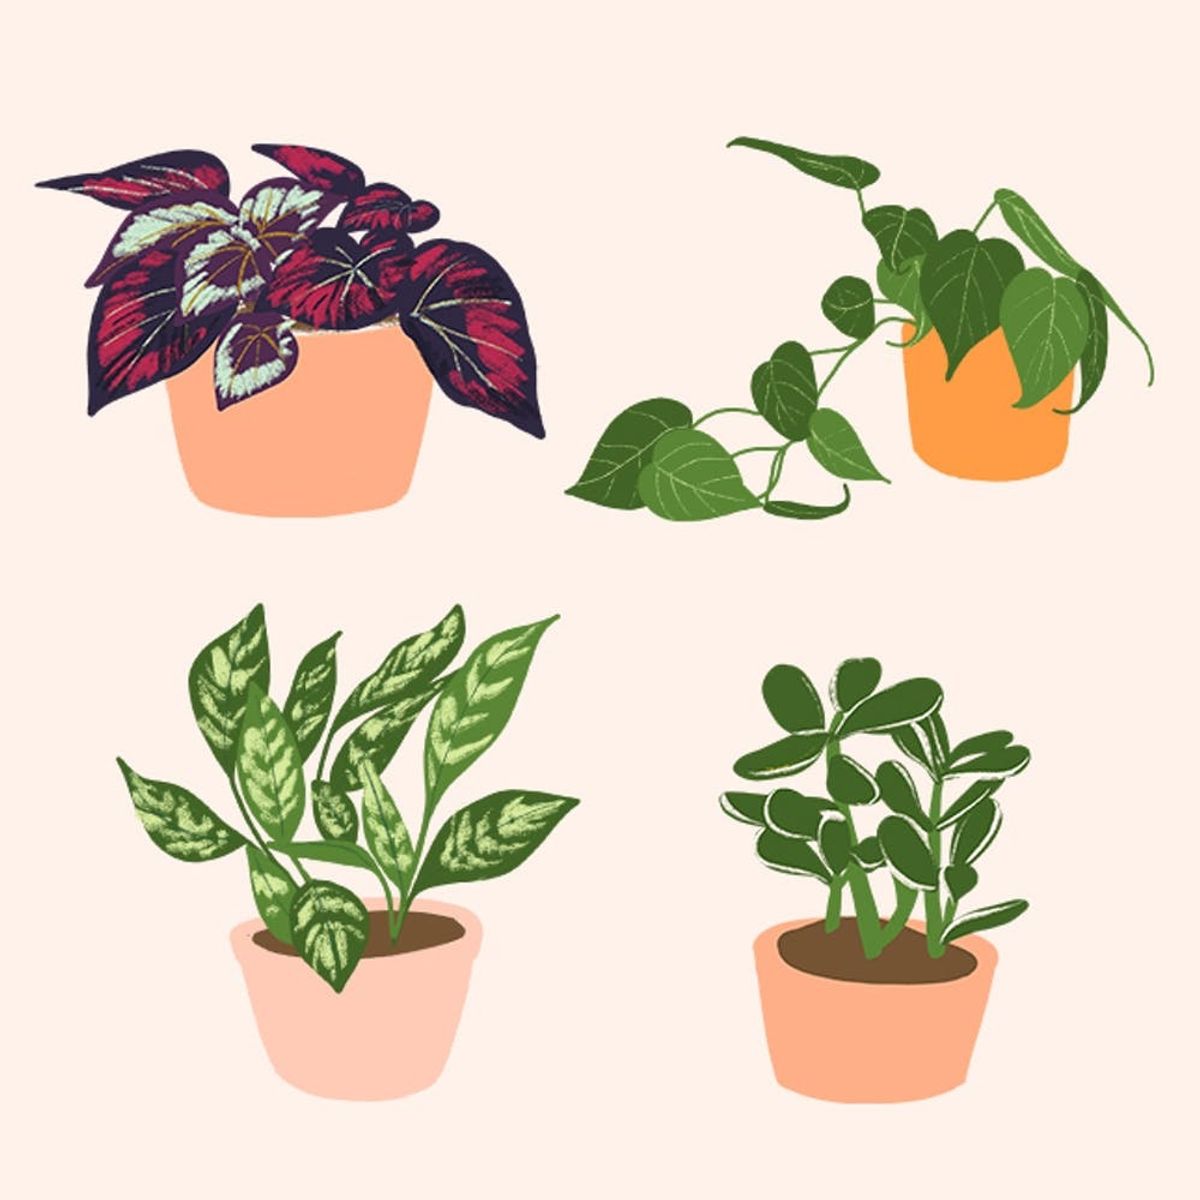 14 Houseplants That Are Dangerous for Your Pets and Kiddos